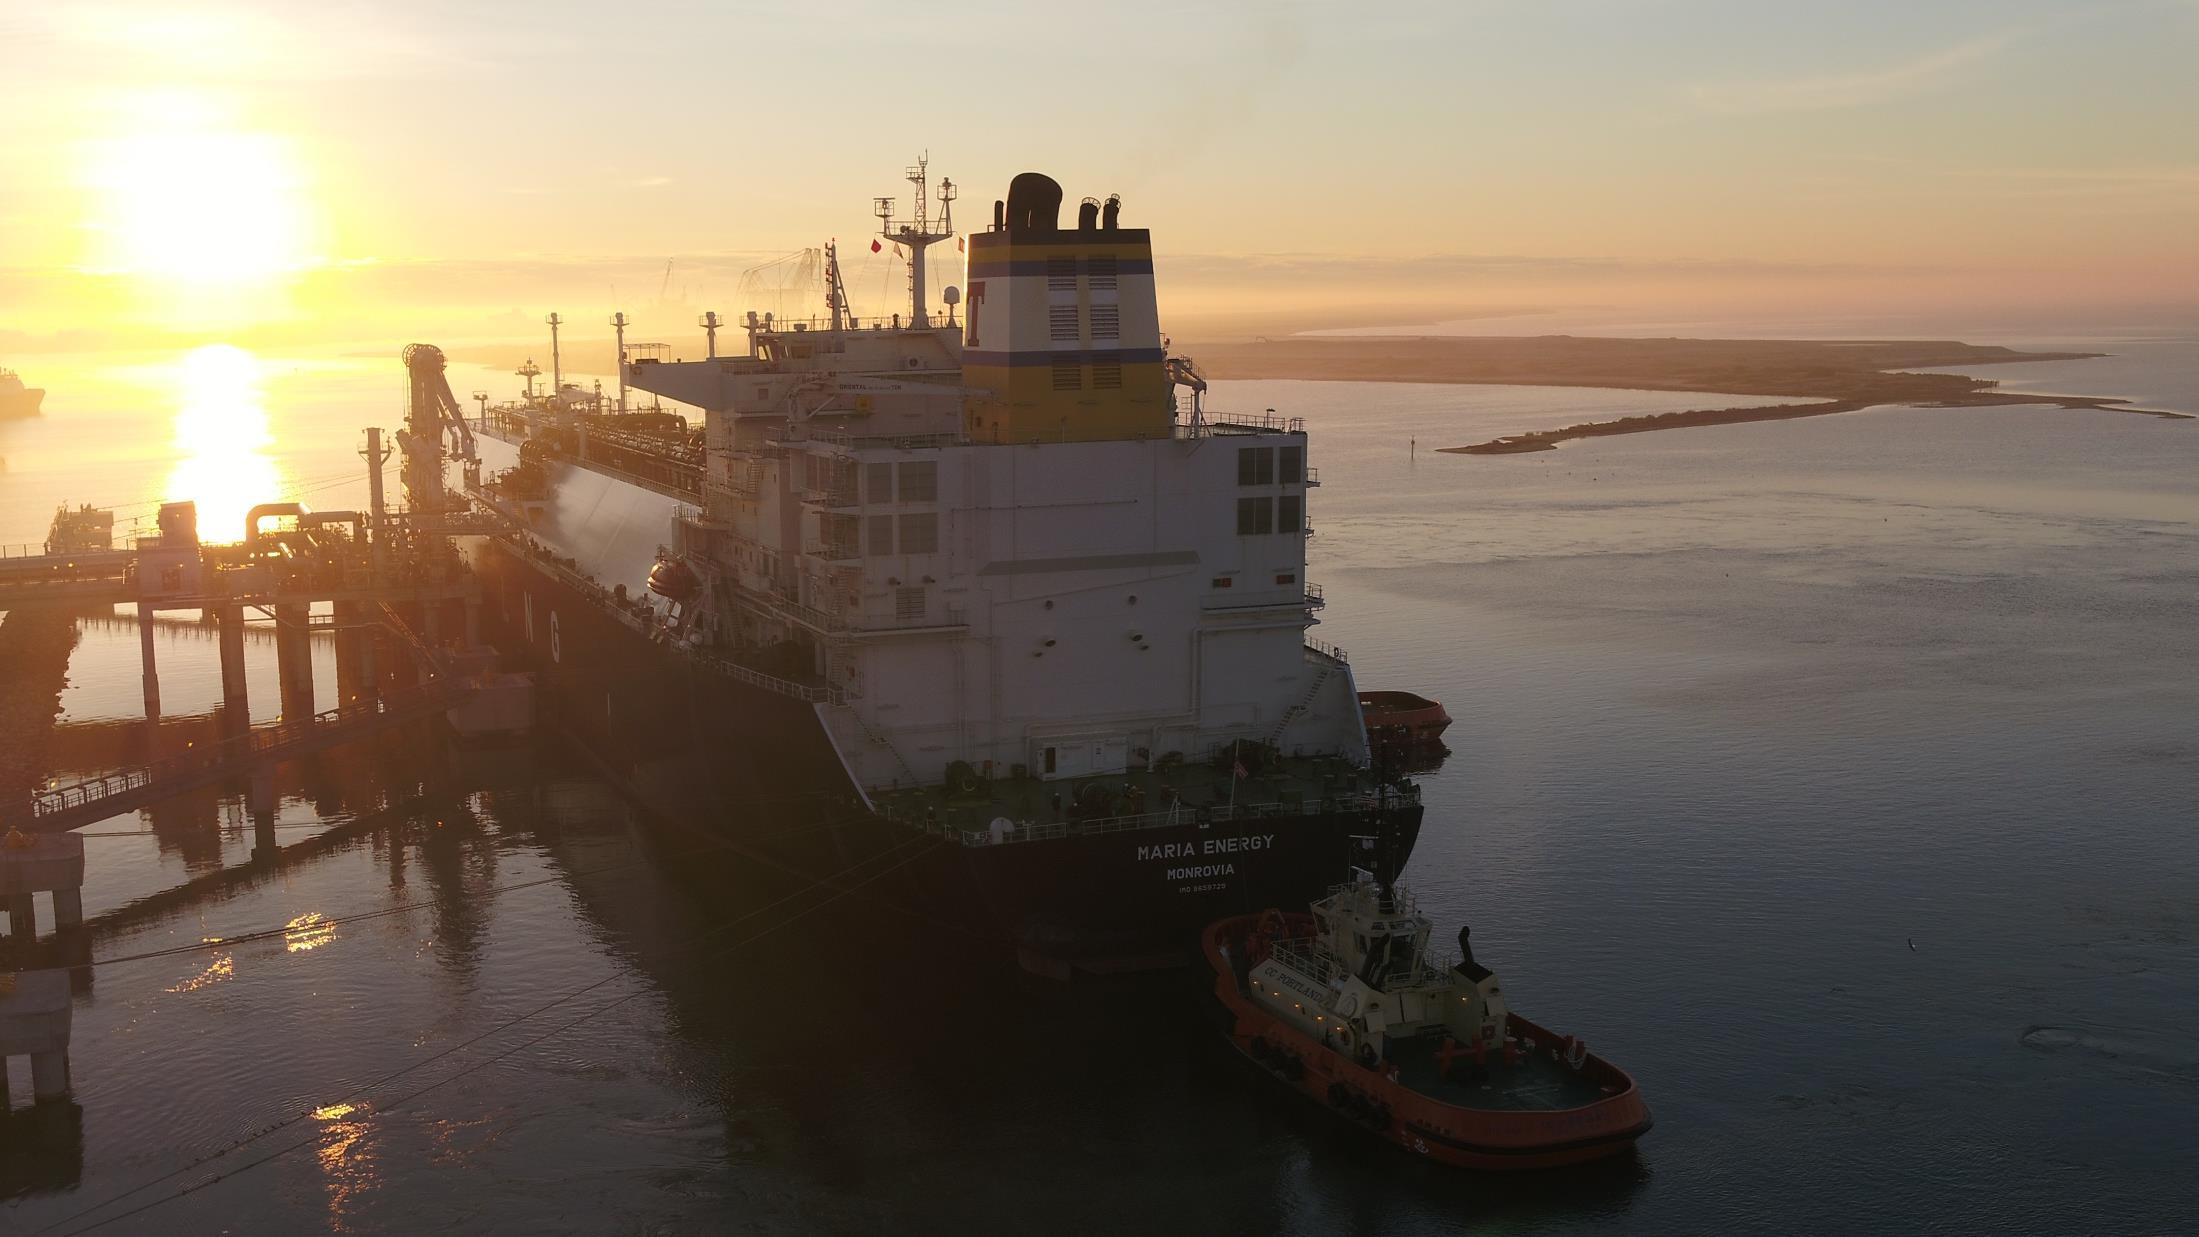 Bloomberg LNG on track for post-COVID recovery